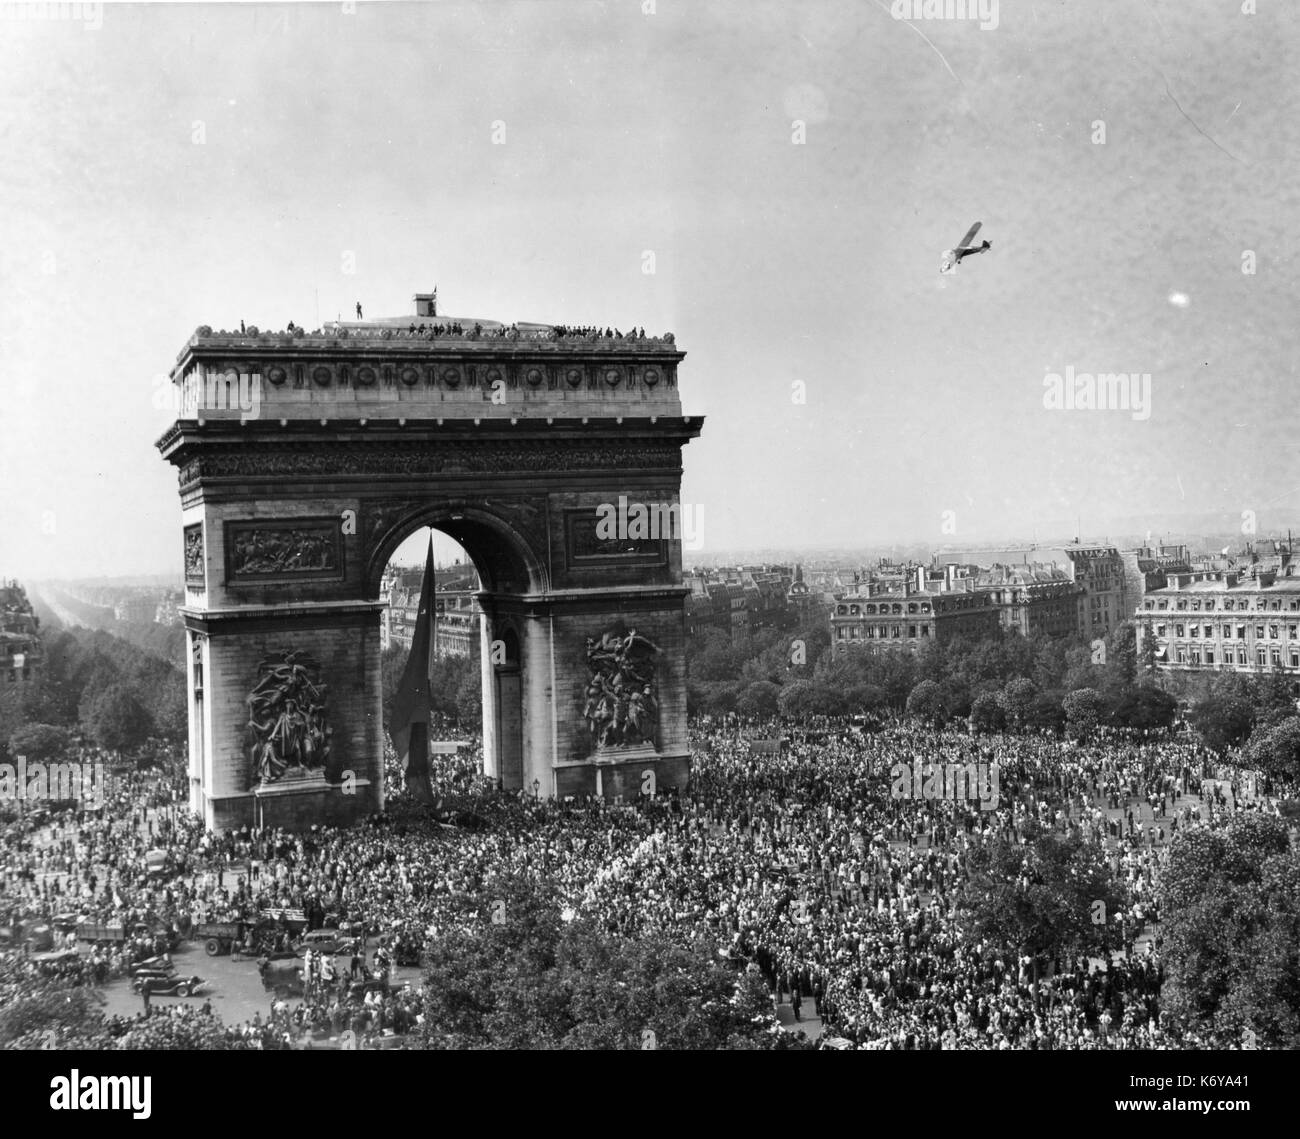 Parisians mass around the Arc de Triomphe as a circling plane dips in salute to the men of the Allied armies who liberated the city. All Paris turned out to greet French and US units as they entered the city in triumph. Paris, France, 8/26/44. Stock Photo